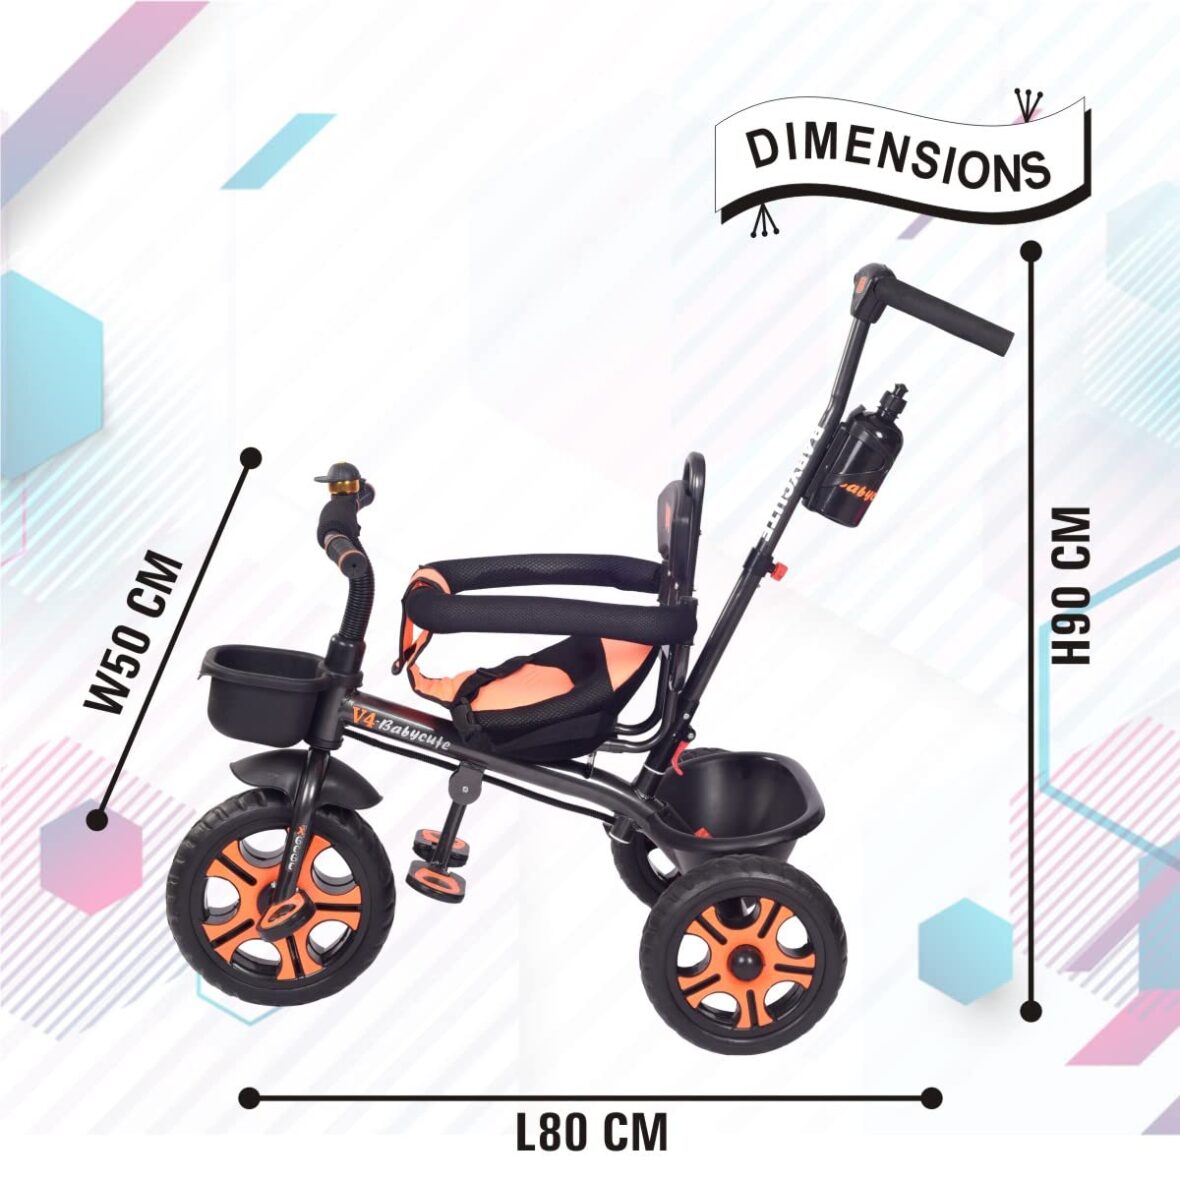 BabyCute V-4 Sports Plug and Play Tricycle for Kids with Parental Control, Baby Cute V4 Baby Cycle for 2-5 Years Old